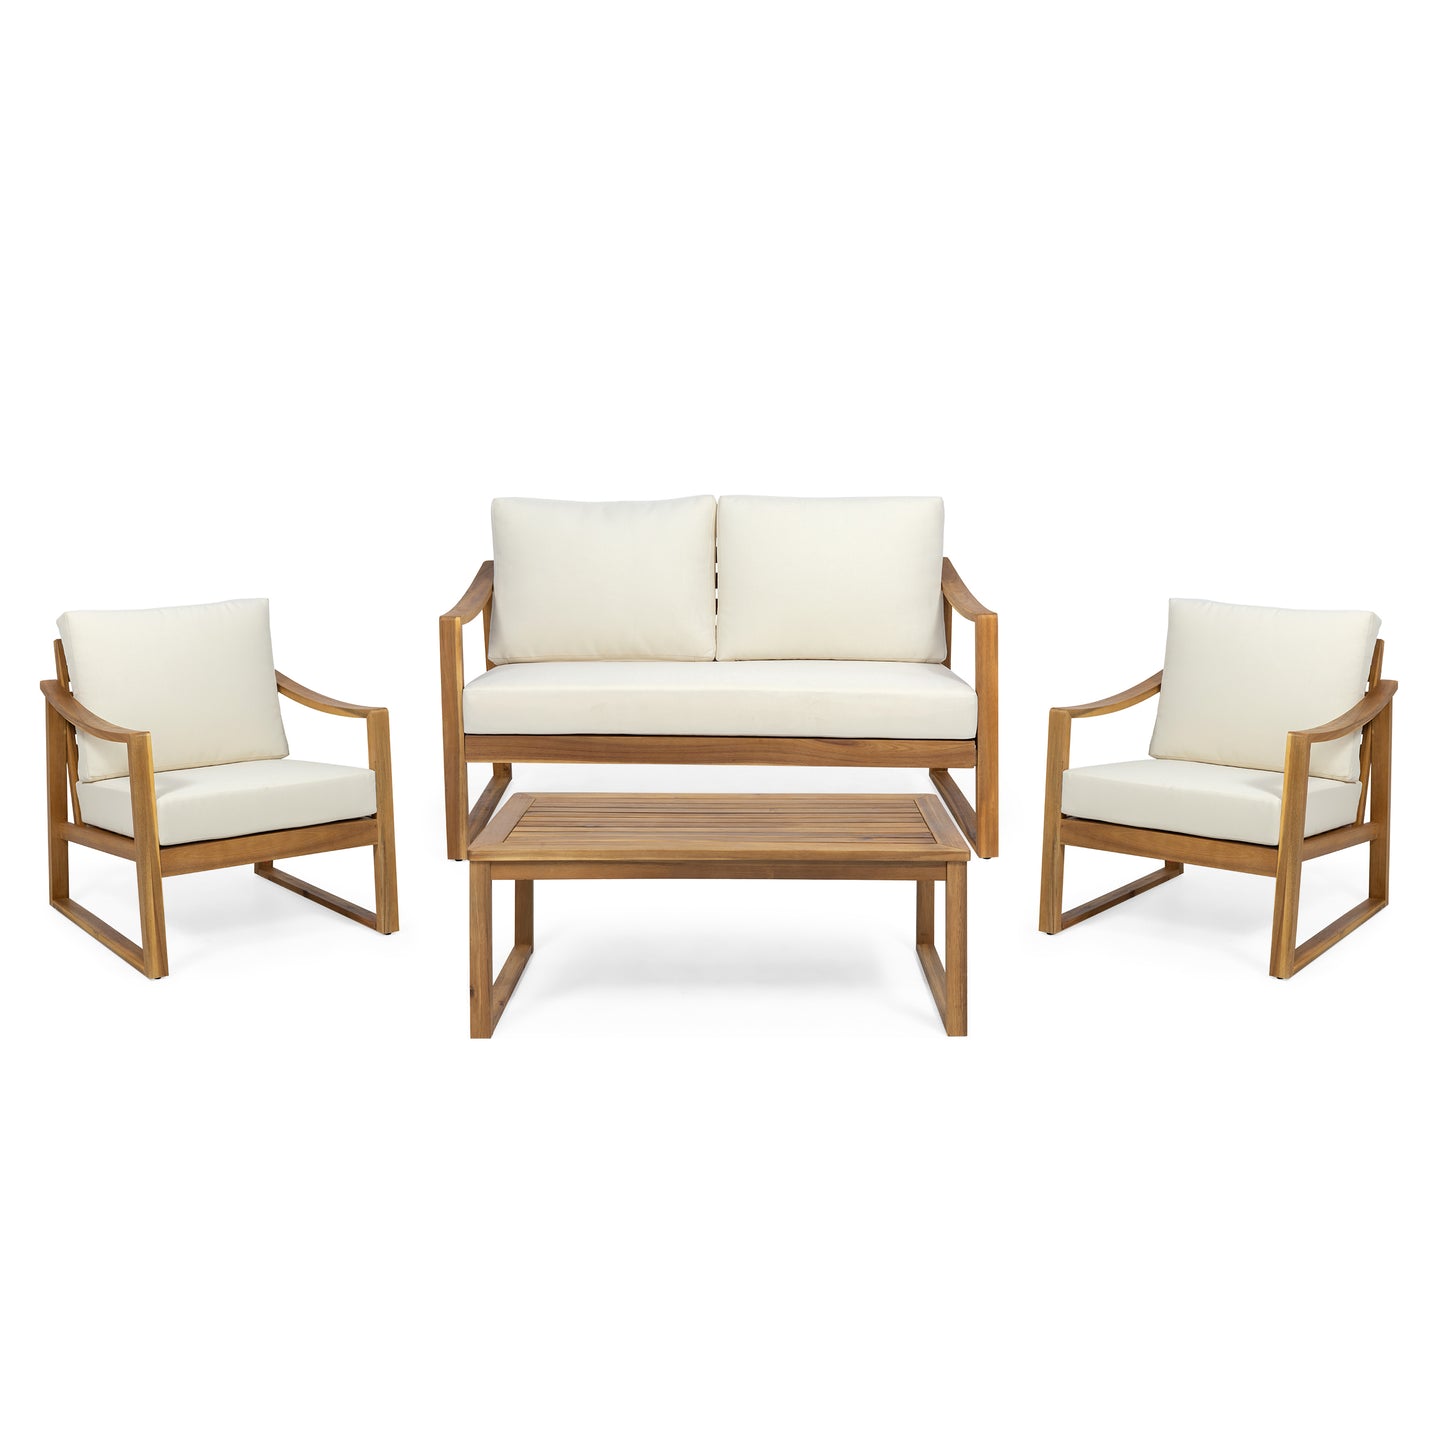 Johnlucas Outdoor 4 Seater Acacia Wood Chat Set with Water Resistant Cushions